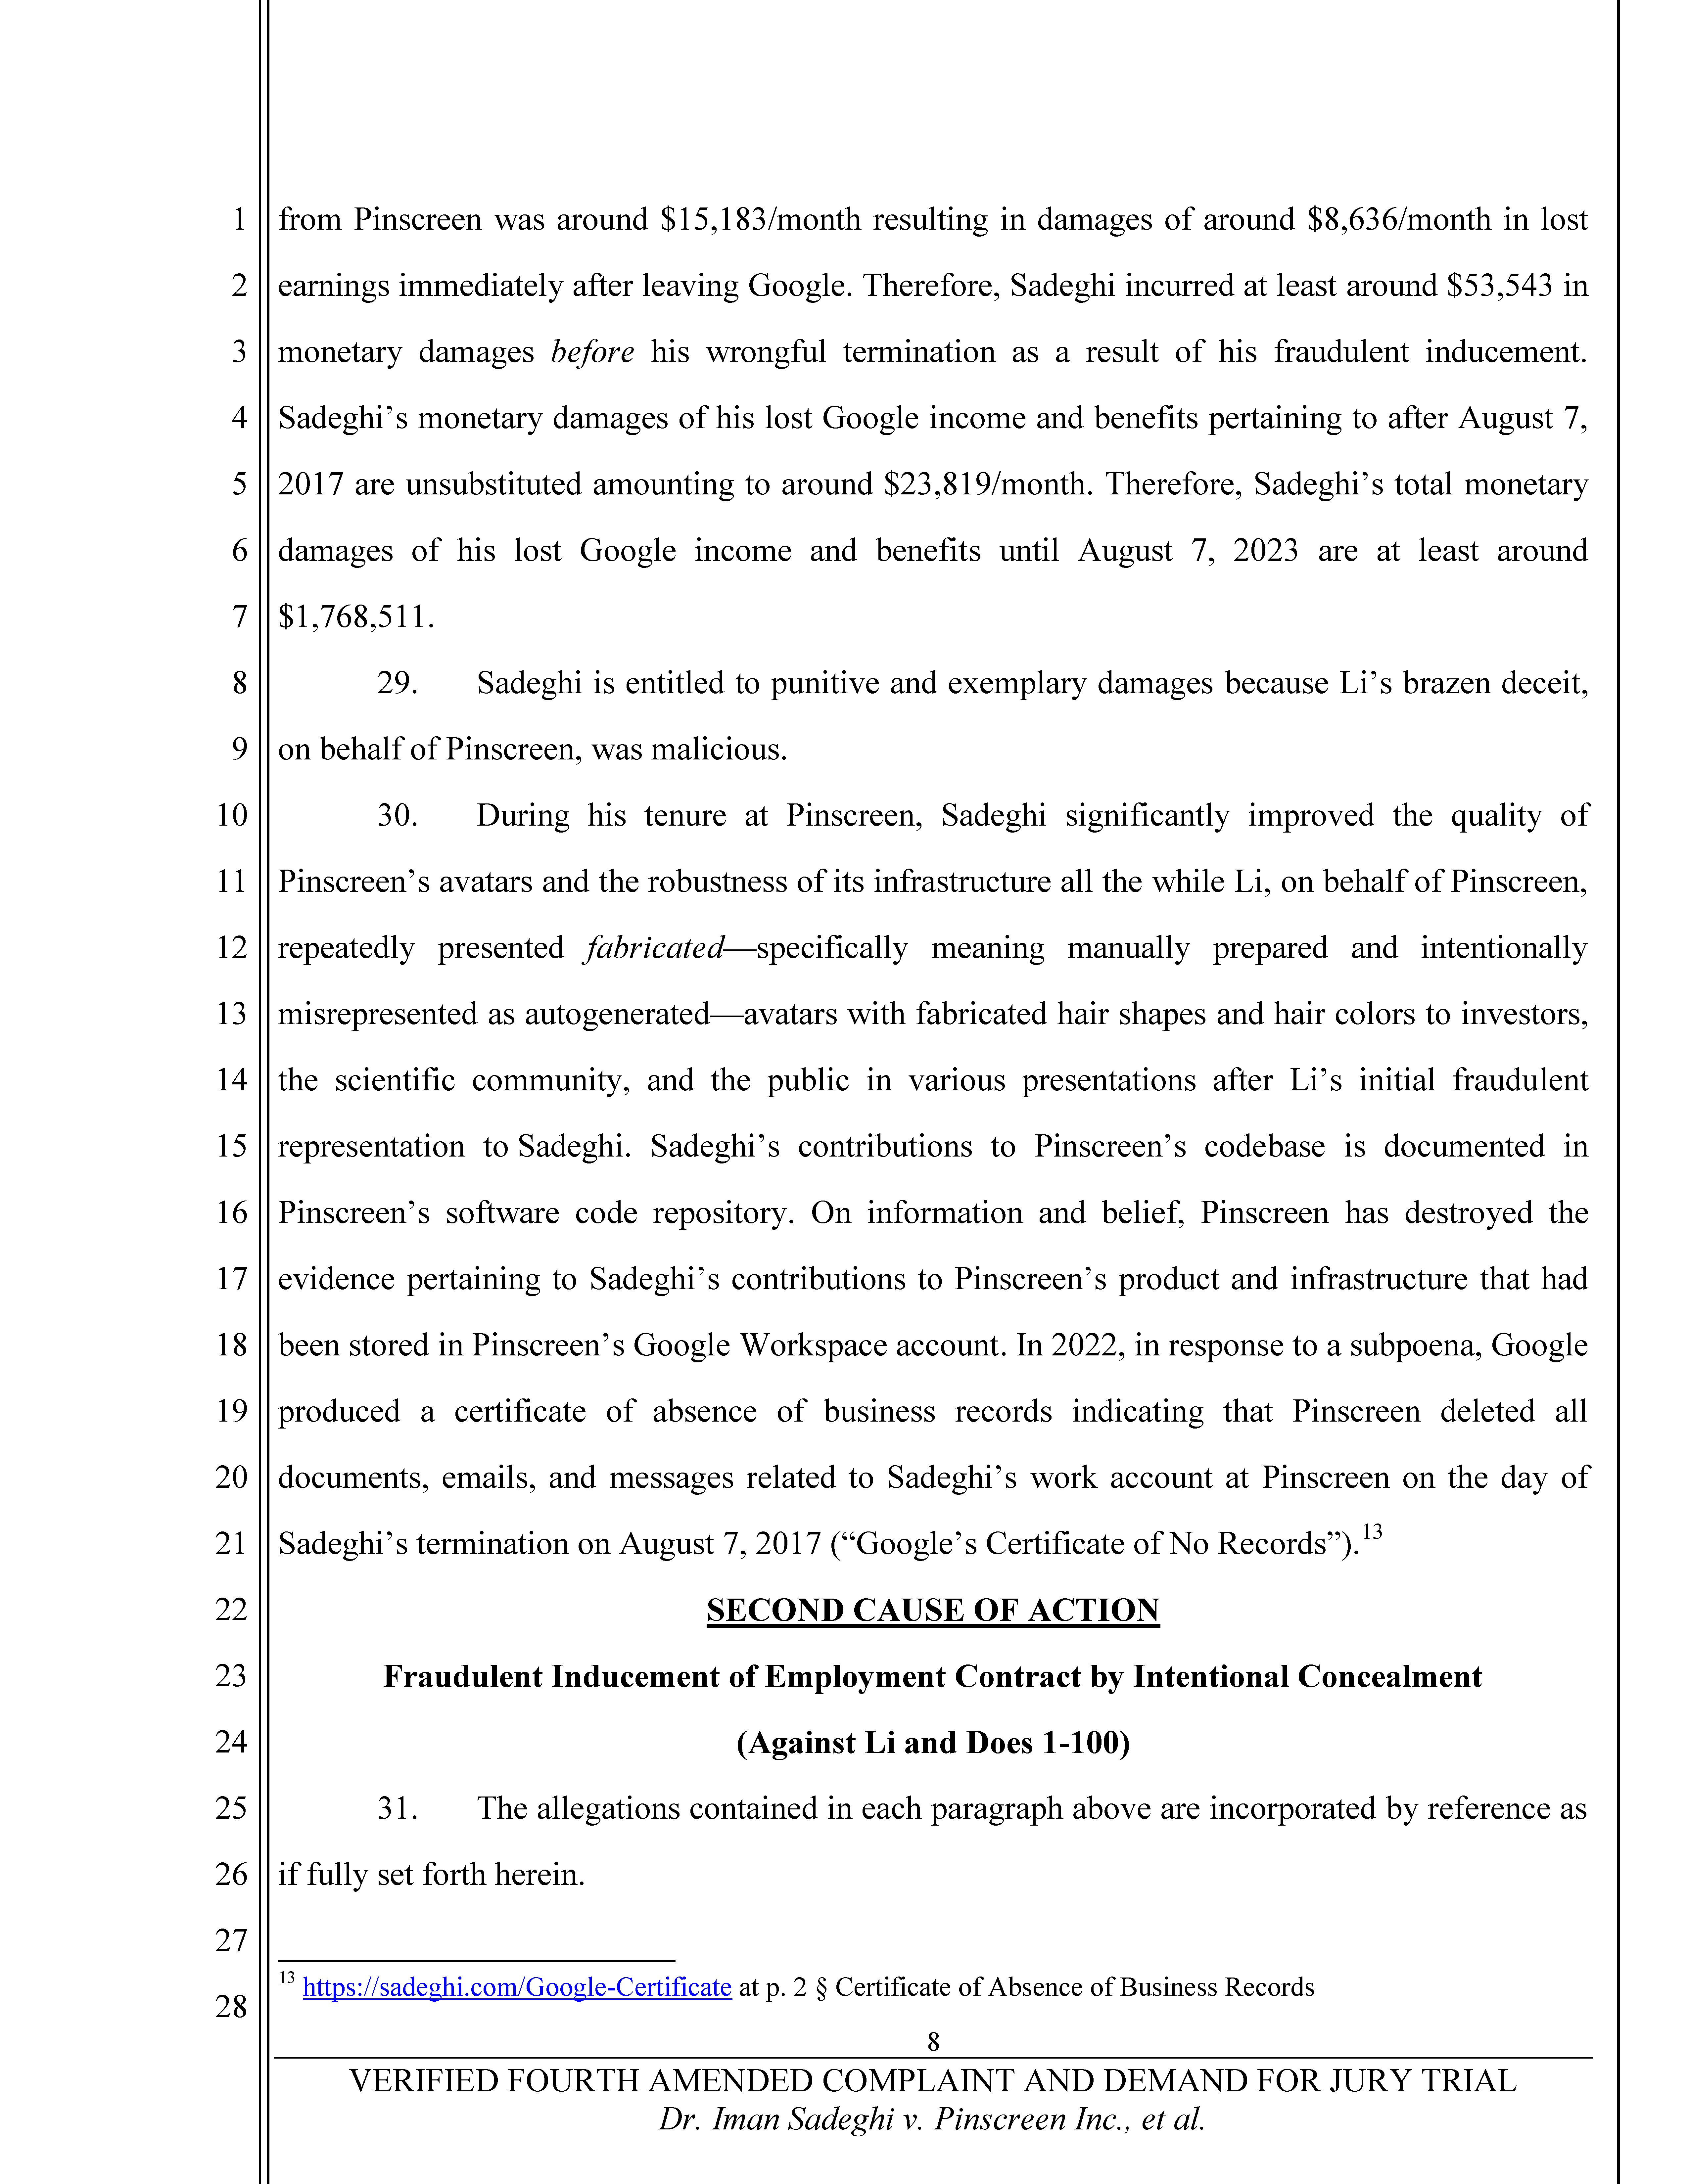 Fourth Amended Complaint (4AC) Page 9